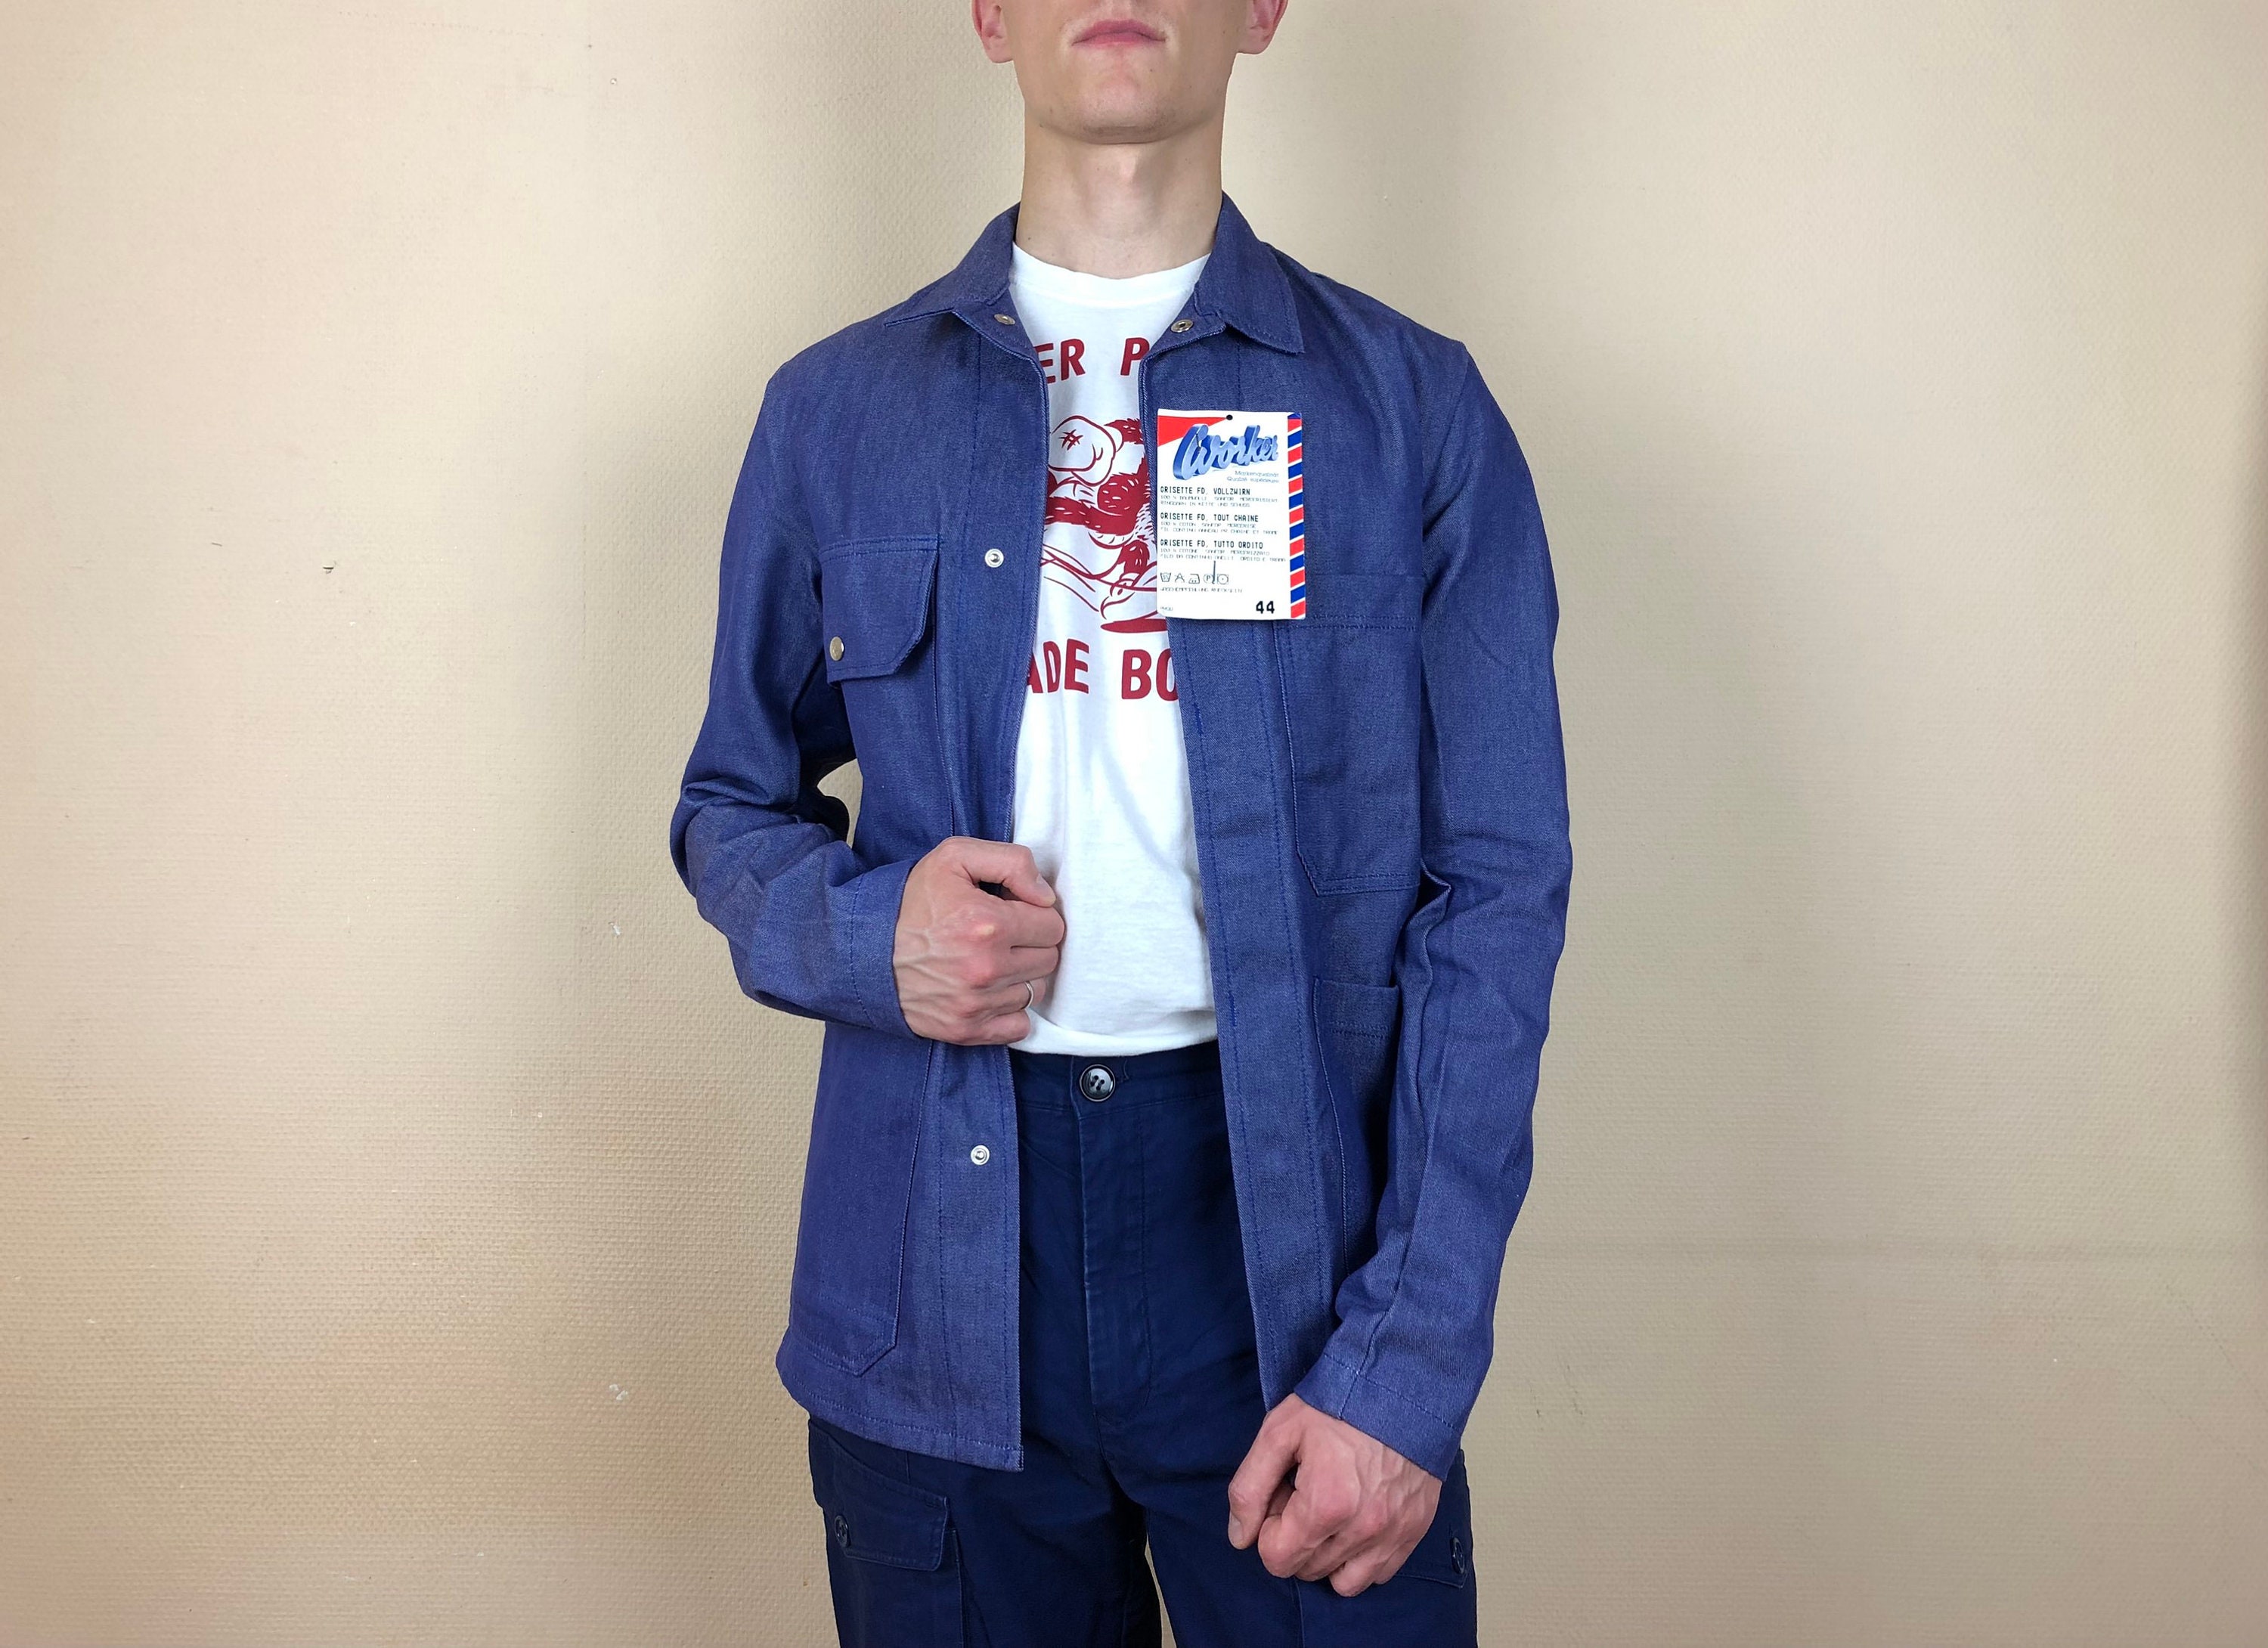 Cult Item: French Worker Jacket, A History Of The Bleu De Travail